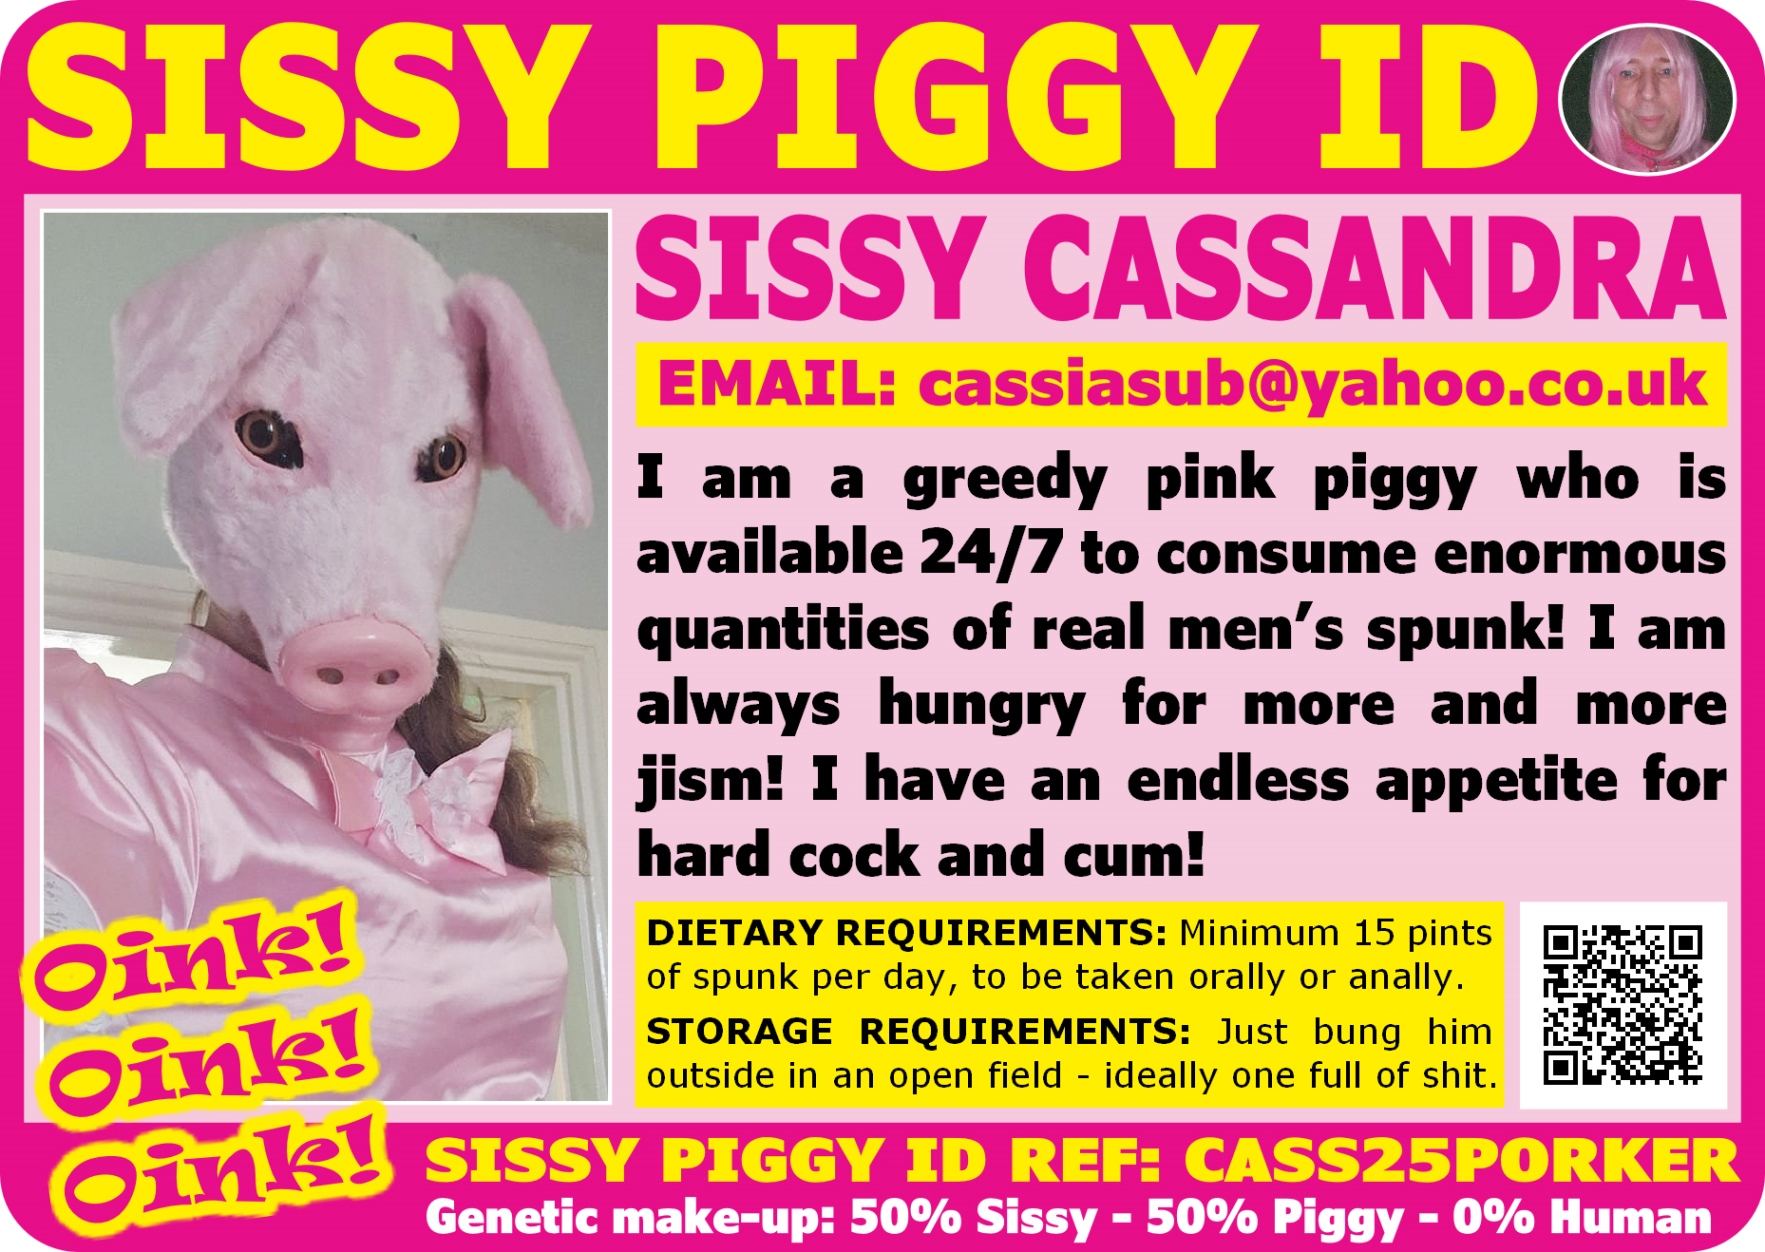 Public Domain Sissy
Signed Sissy Exposure Agreement
Forever Exposed Cocksucker is Named